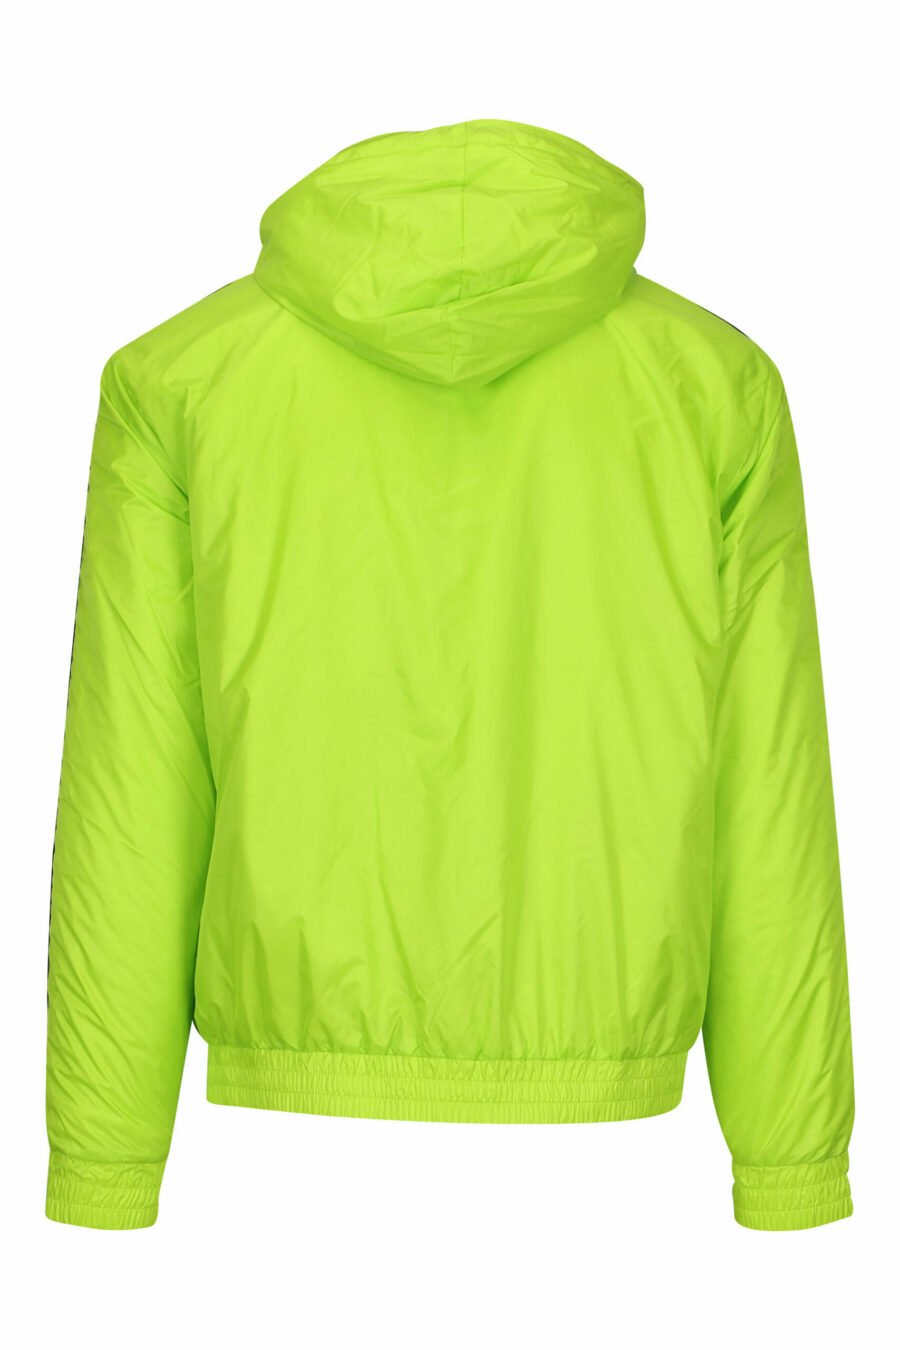 Lime green waterproof jacket with hood, white side lines and "lux identity" logo - 8057970709060 1 scaled